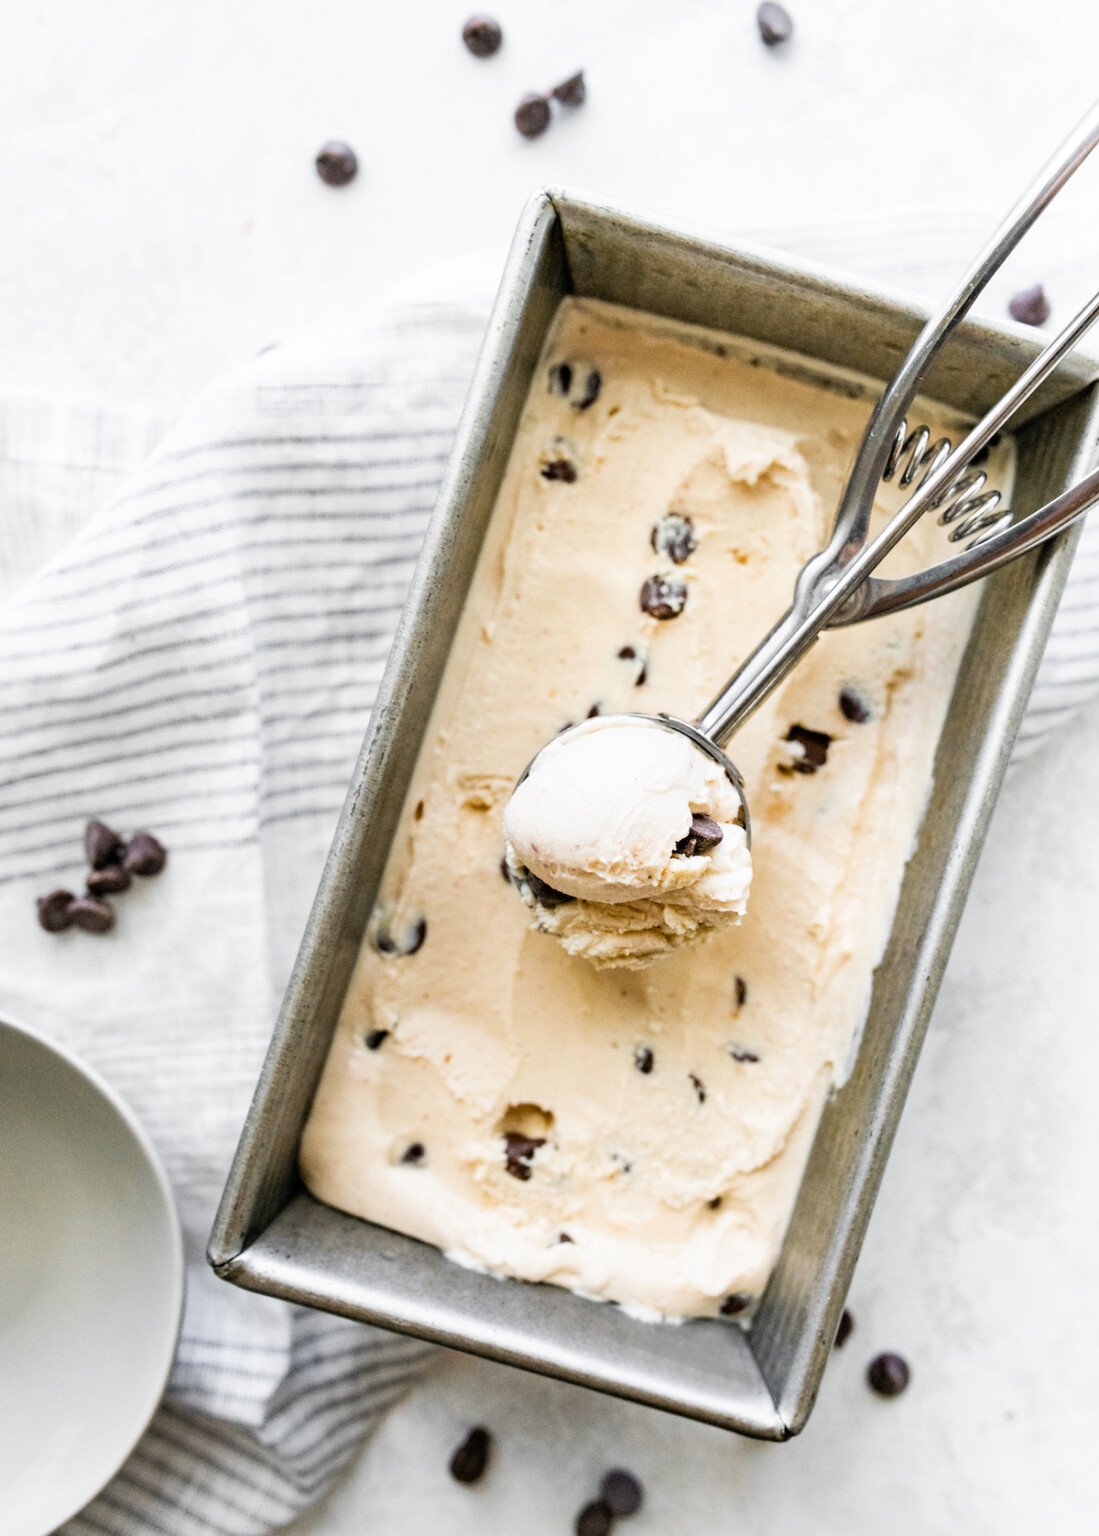 Pan of chocolate chip cottage cheese ice cream with a full ice cream scoop inside.